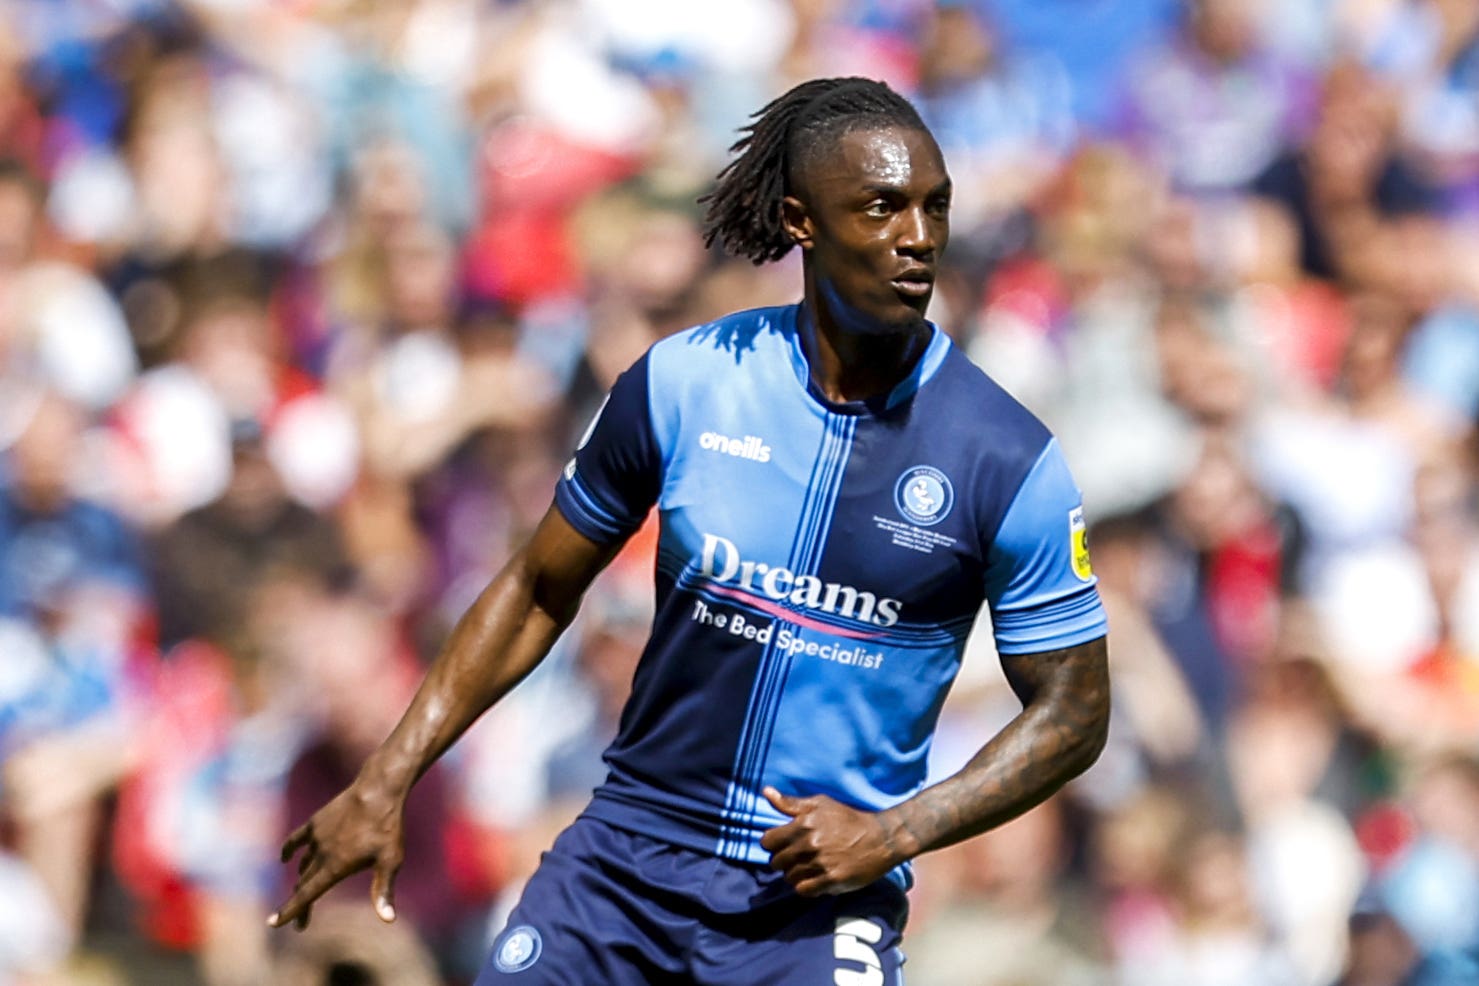 Anthony Stewart, who used to play for Wycombe, was targeted with racist abuse at the weekend